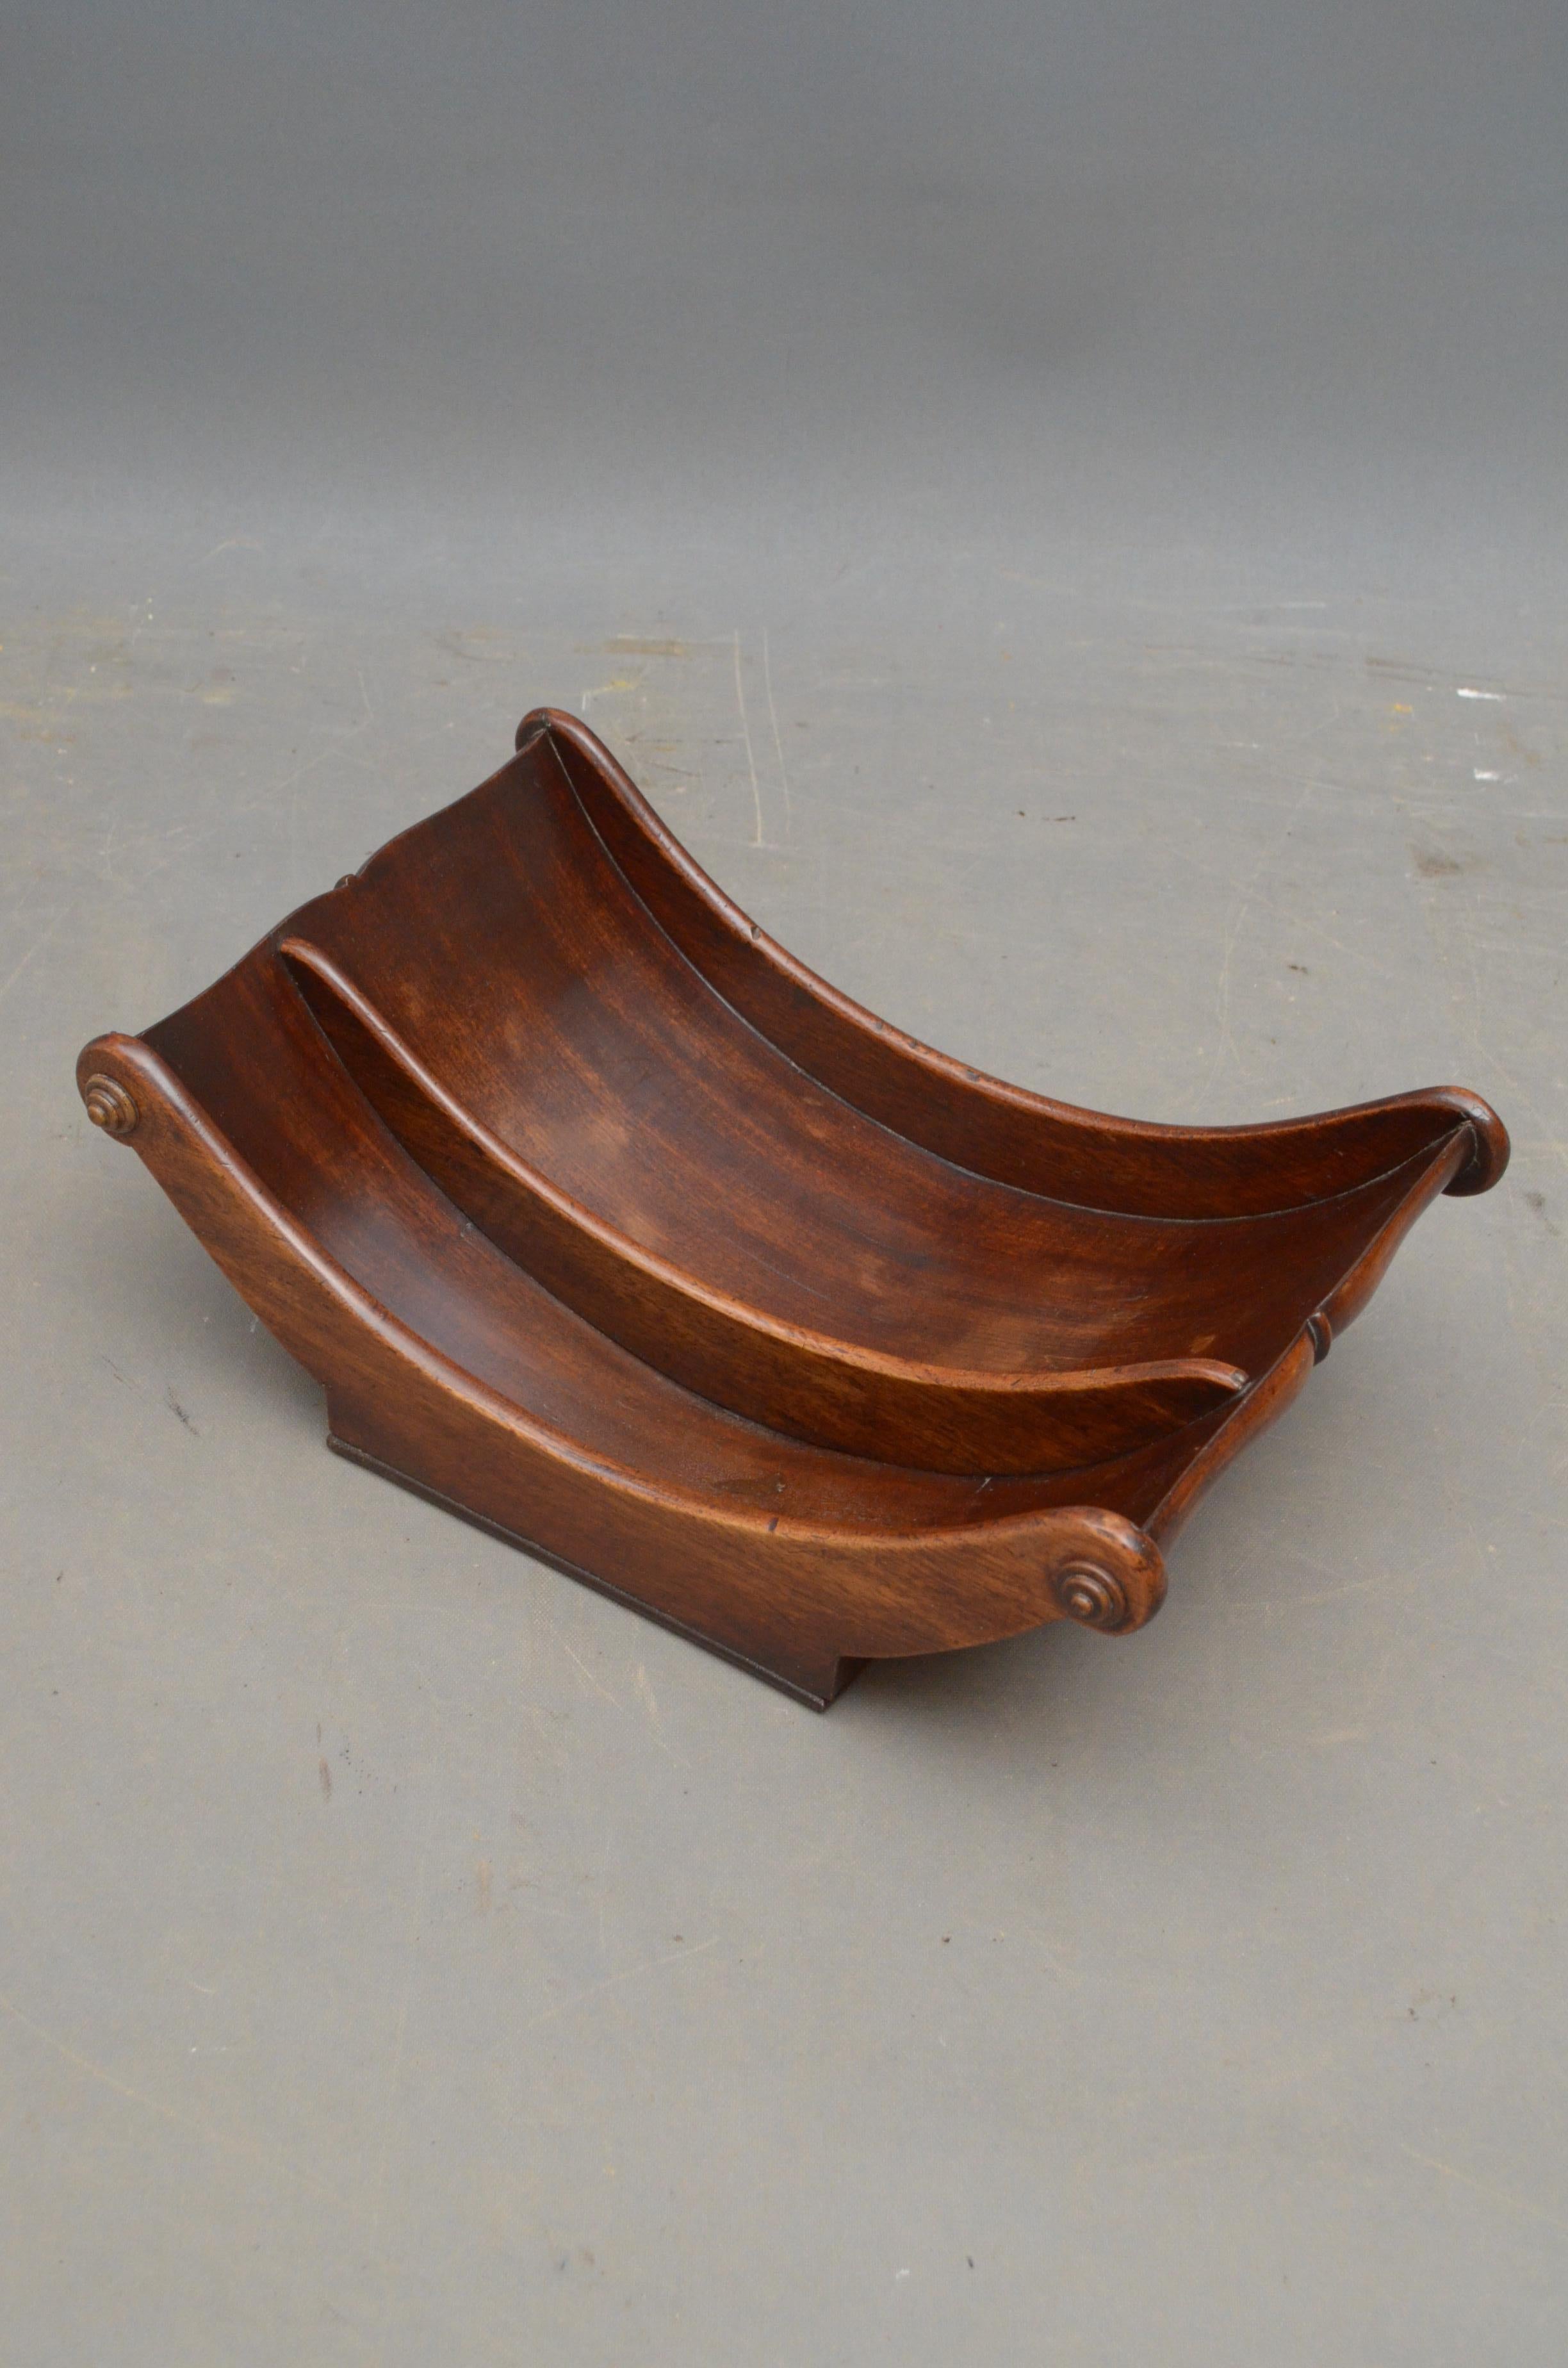 K0464 A fine quality George III, boat shaped mahogany cheese coaster with carved pateraes to sides and 2 compartments, all retains original finish and excellent original patina. All in wonderful condition throughout - ready to place at home, circa